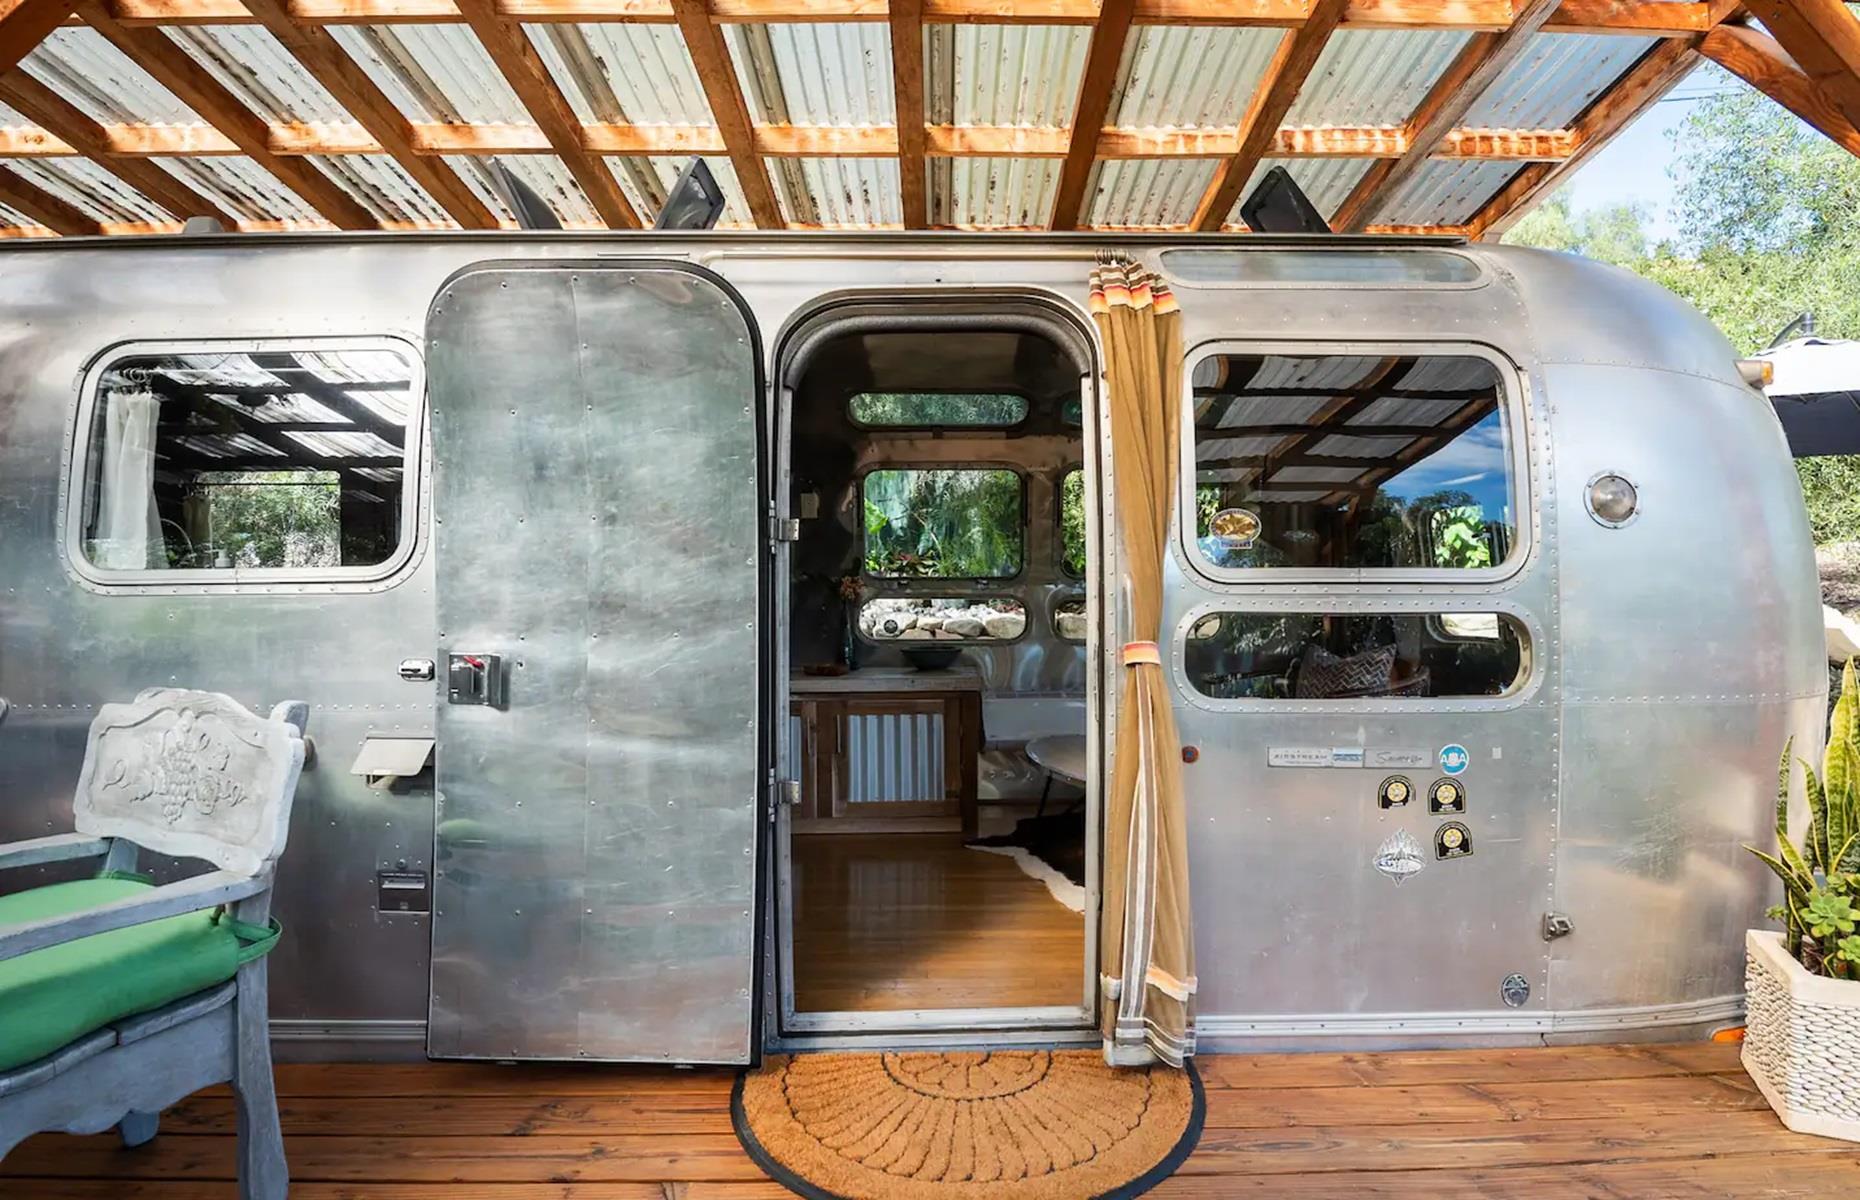 <p>Delia bought the 33-foot Airstream in 2017 and it was in a sorry state. In fact, while transporting it on a tow truck to her property, she had to stop twice just to make sure it was still in one piece.</p>  <p>Delia then spent the next few years renovating the Airstream as and when she could afford to and her main goal was to make it comfortable for her guests. Inside, the structure of the Airstream shines bright, with its shimmering, slightly dented shell taking center stage. </p>